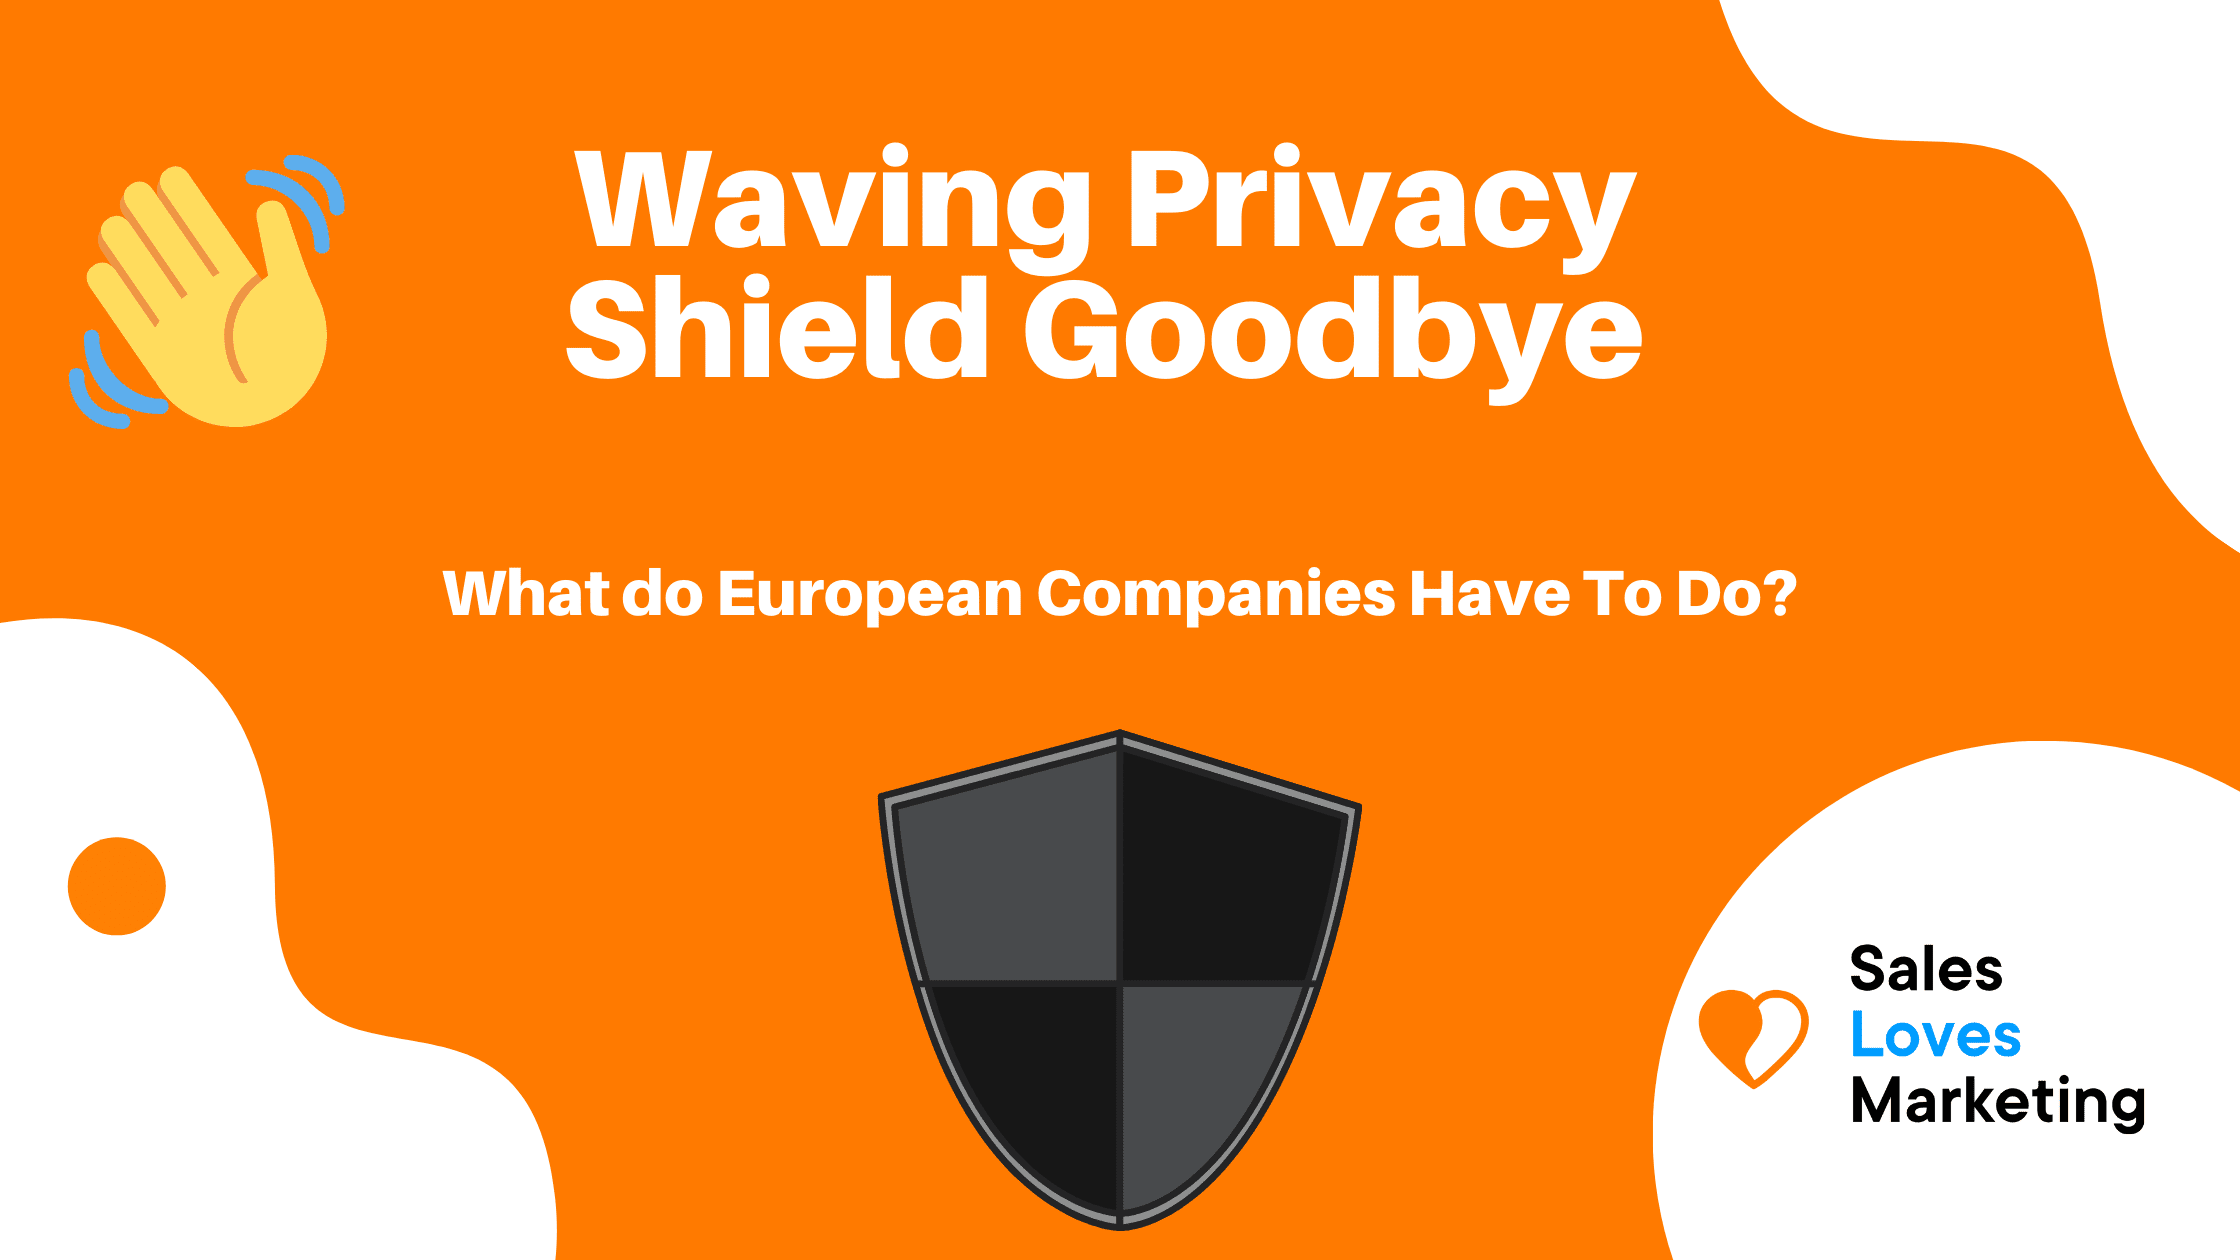 Waving Privacy Shield Goodbye, What Do European Companies Have To Do?